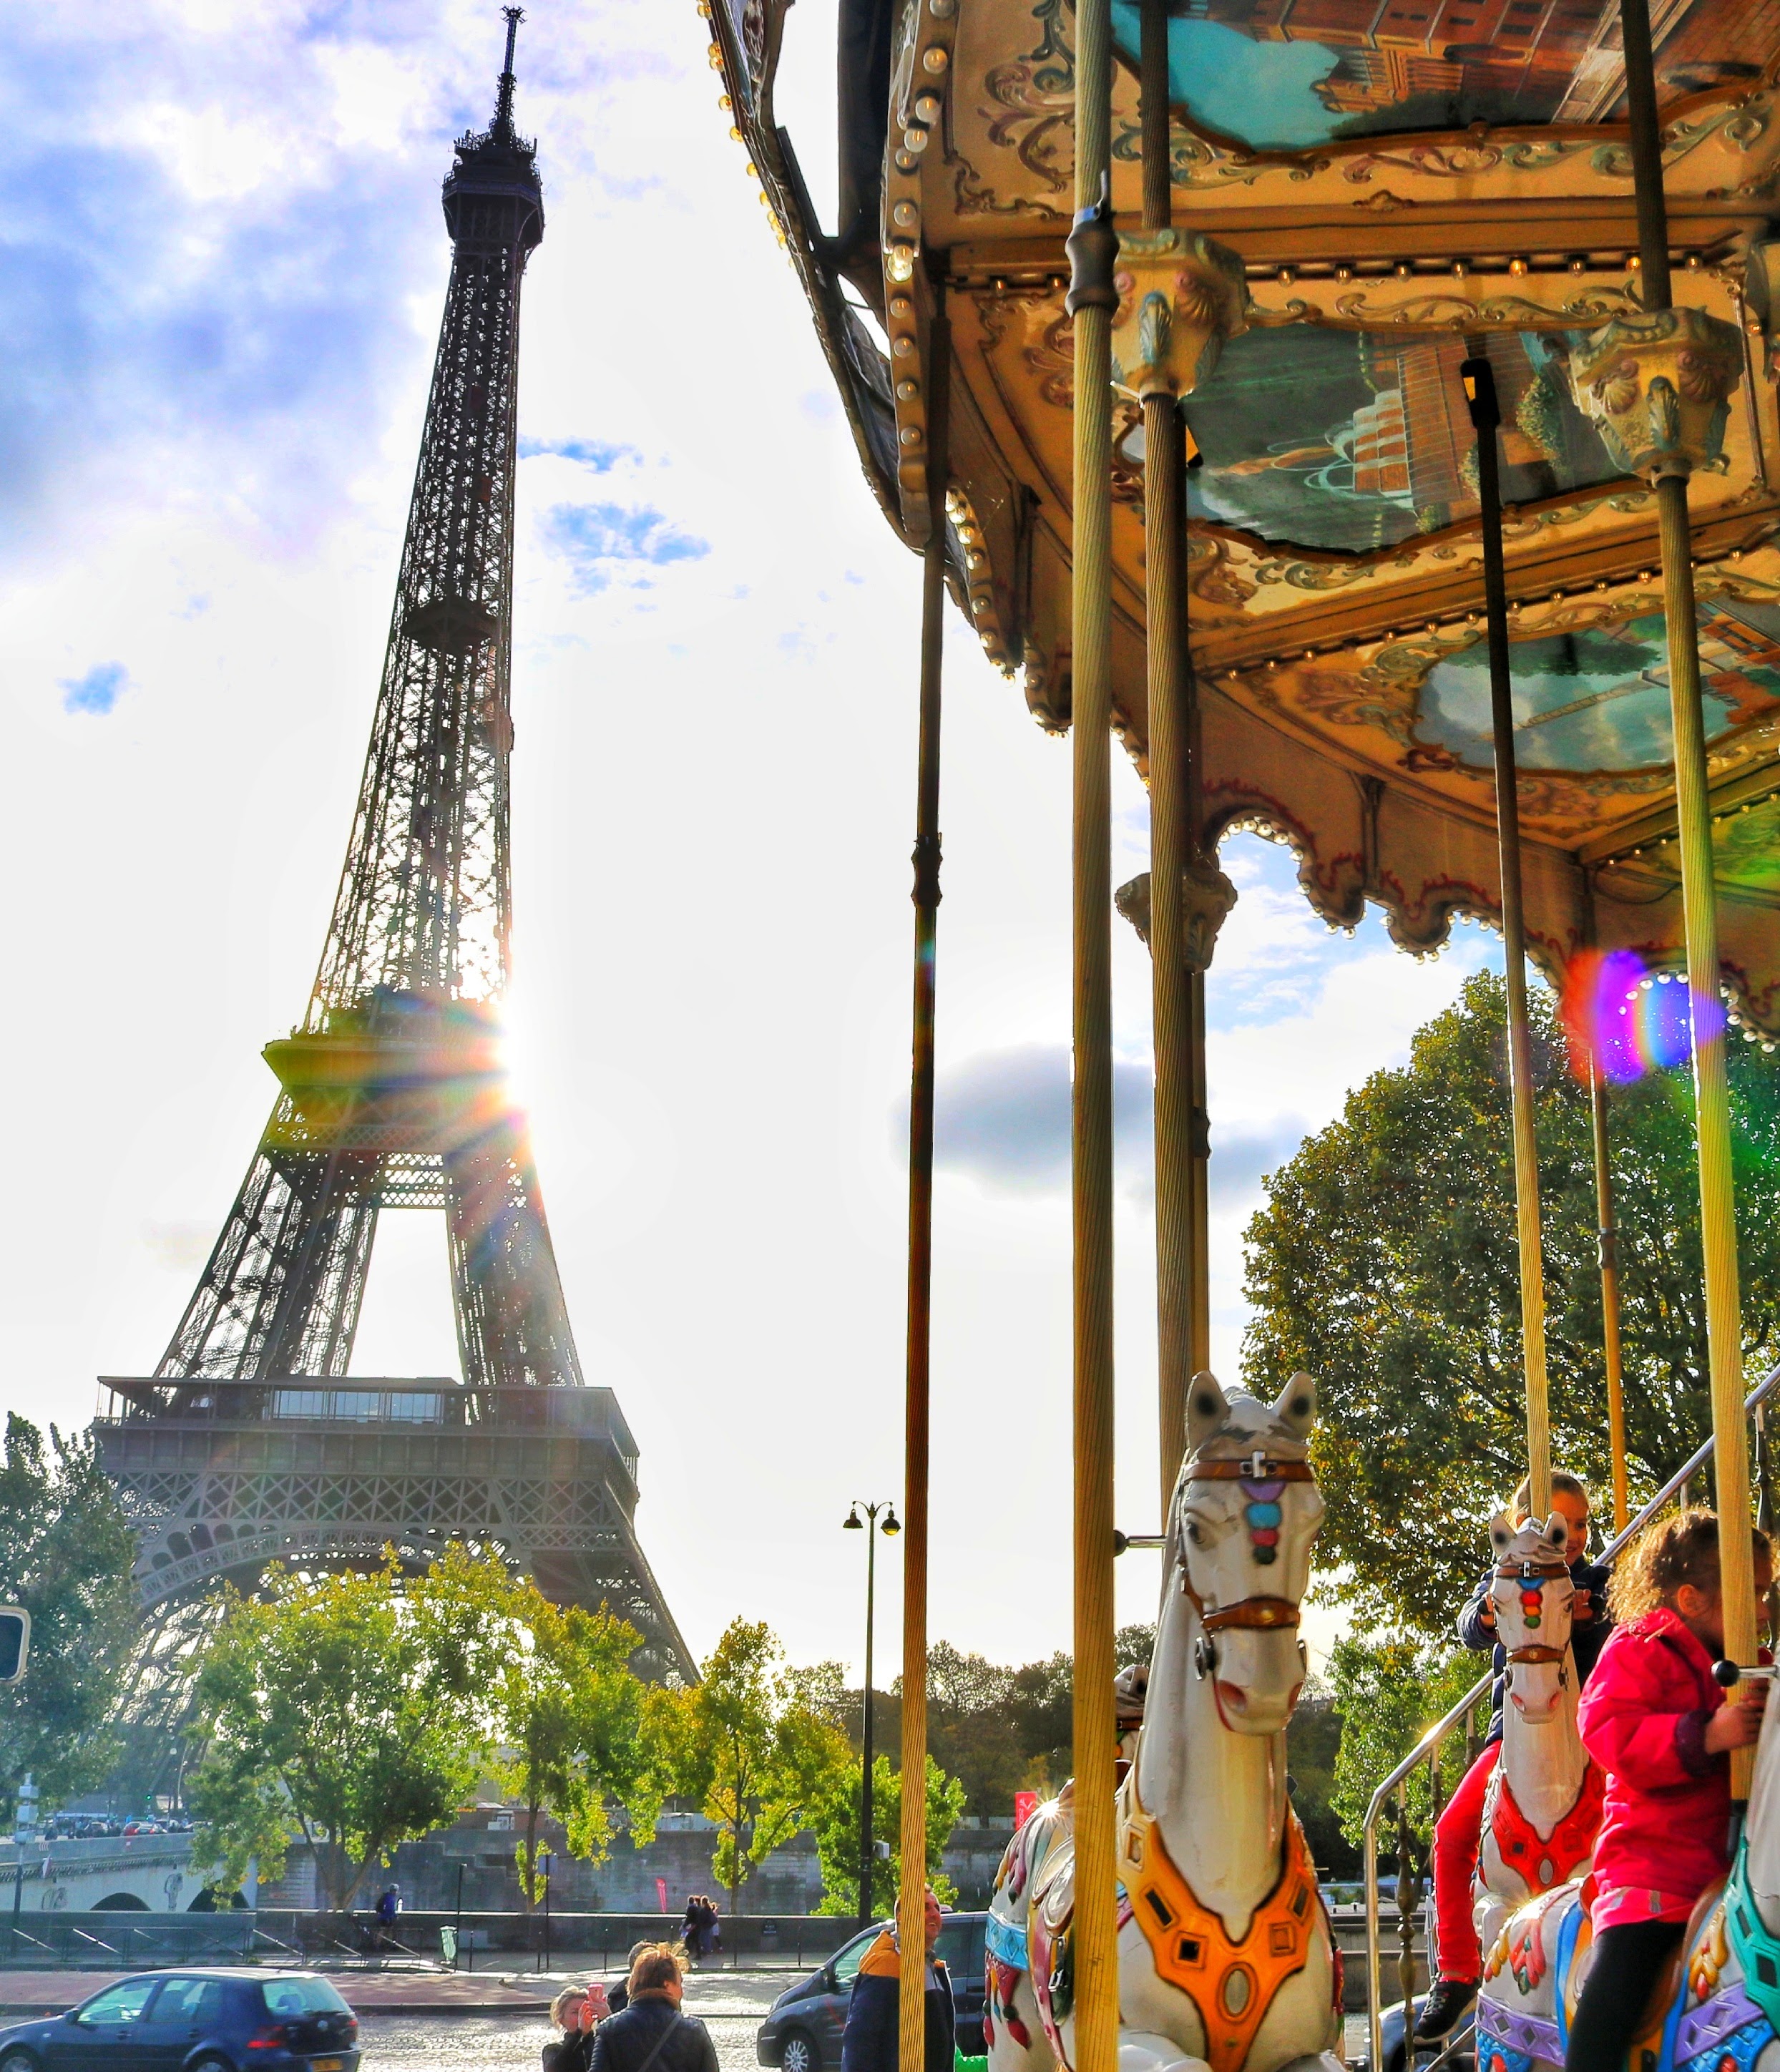 Carousel at the Eiffel Tower